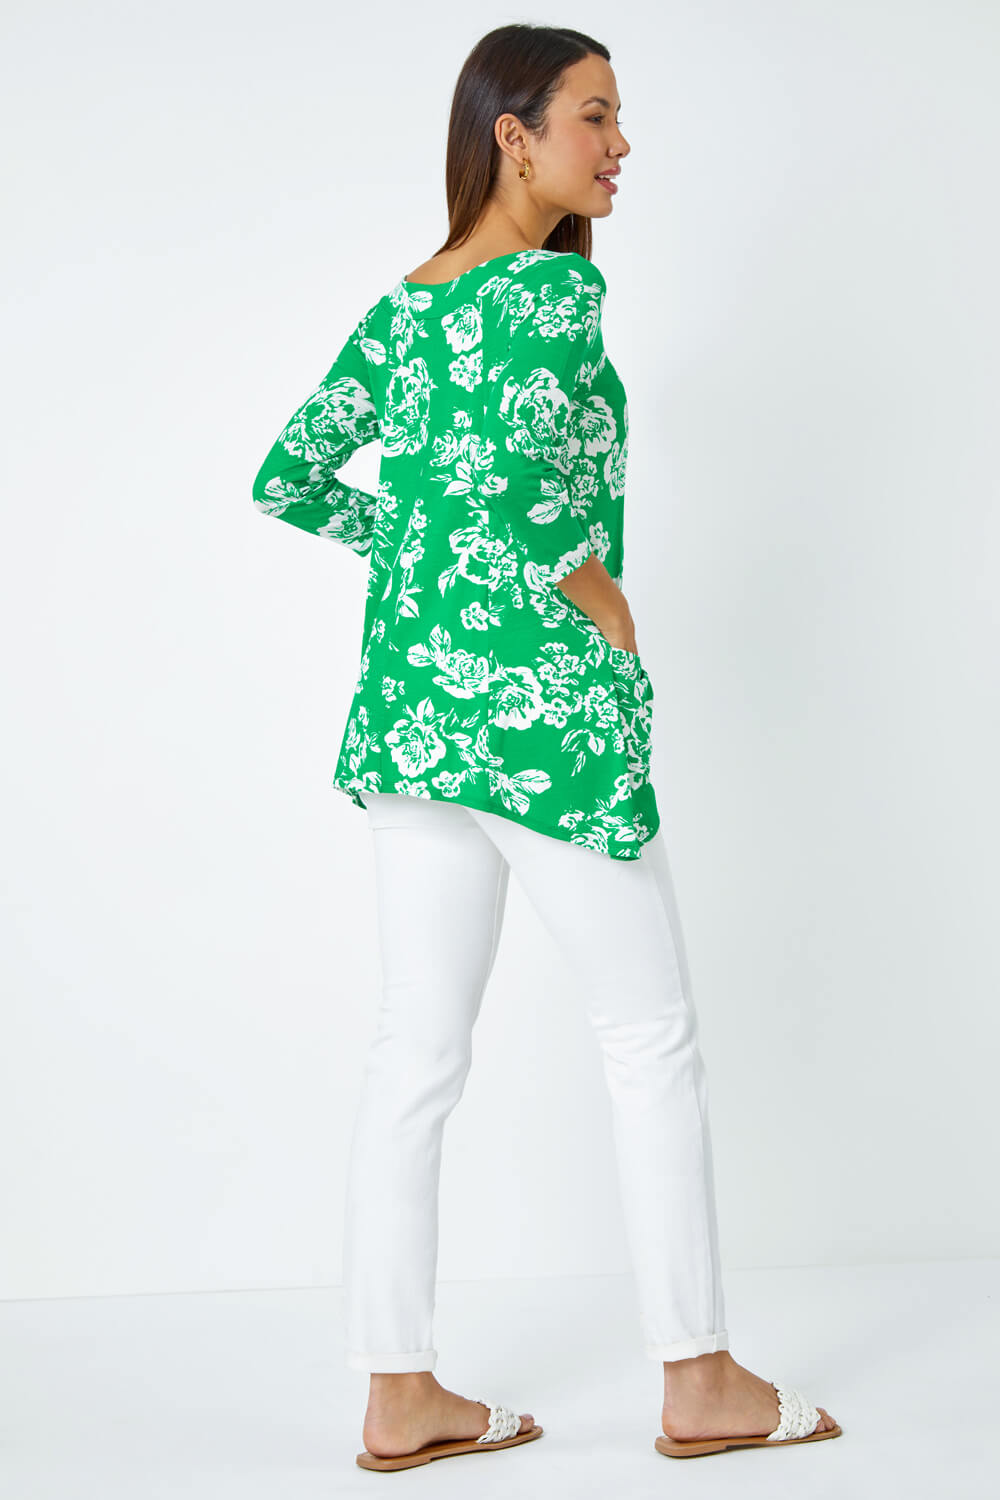 Green Floral Print Swing Stretch Top, Image 3 of 5